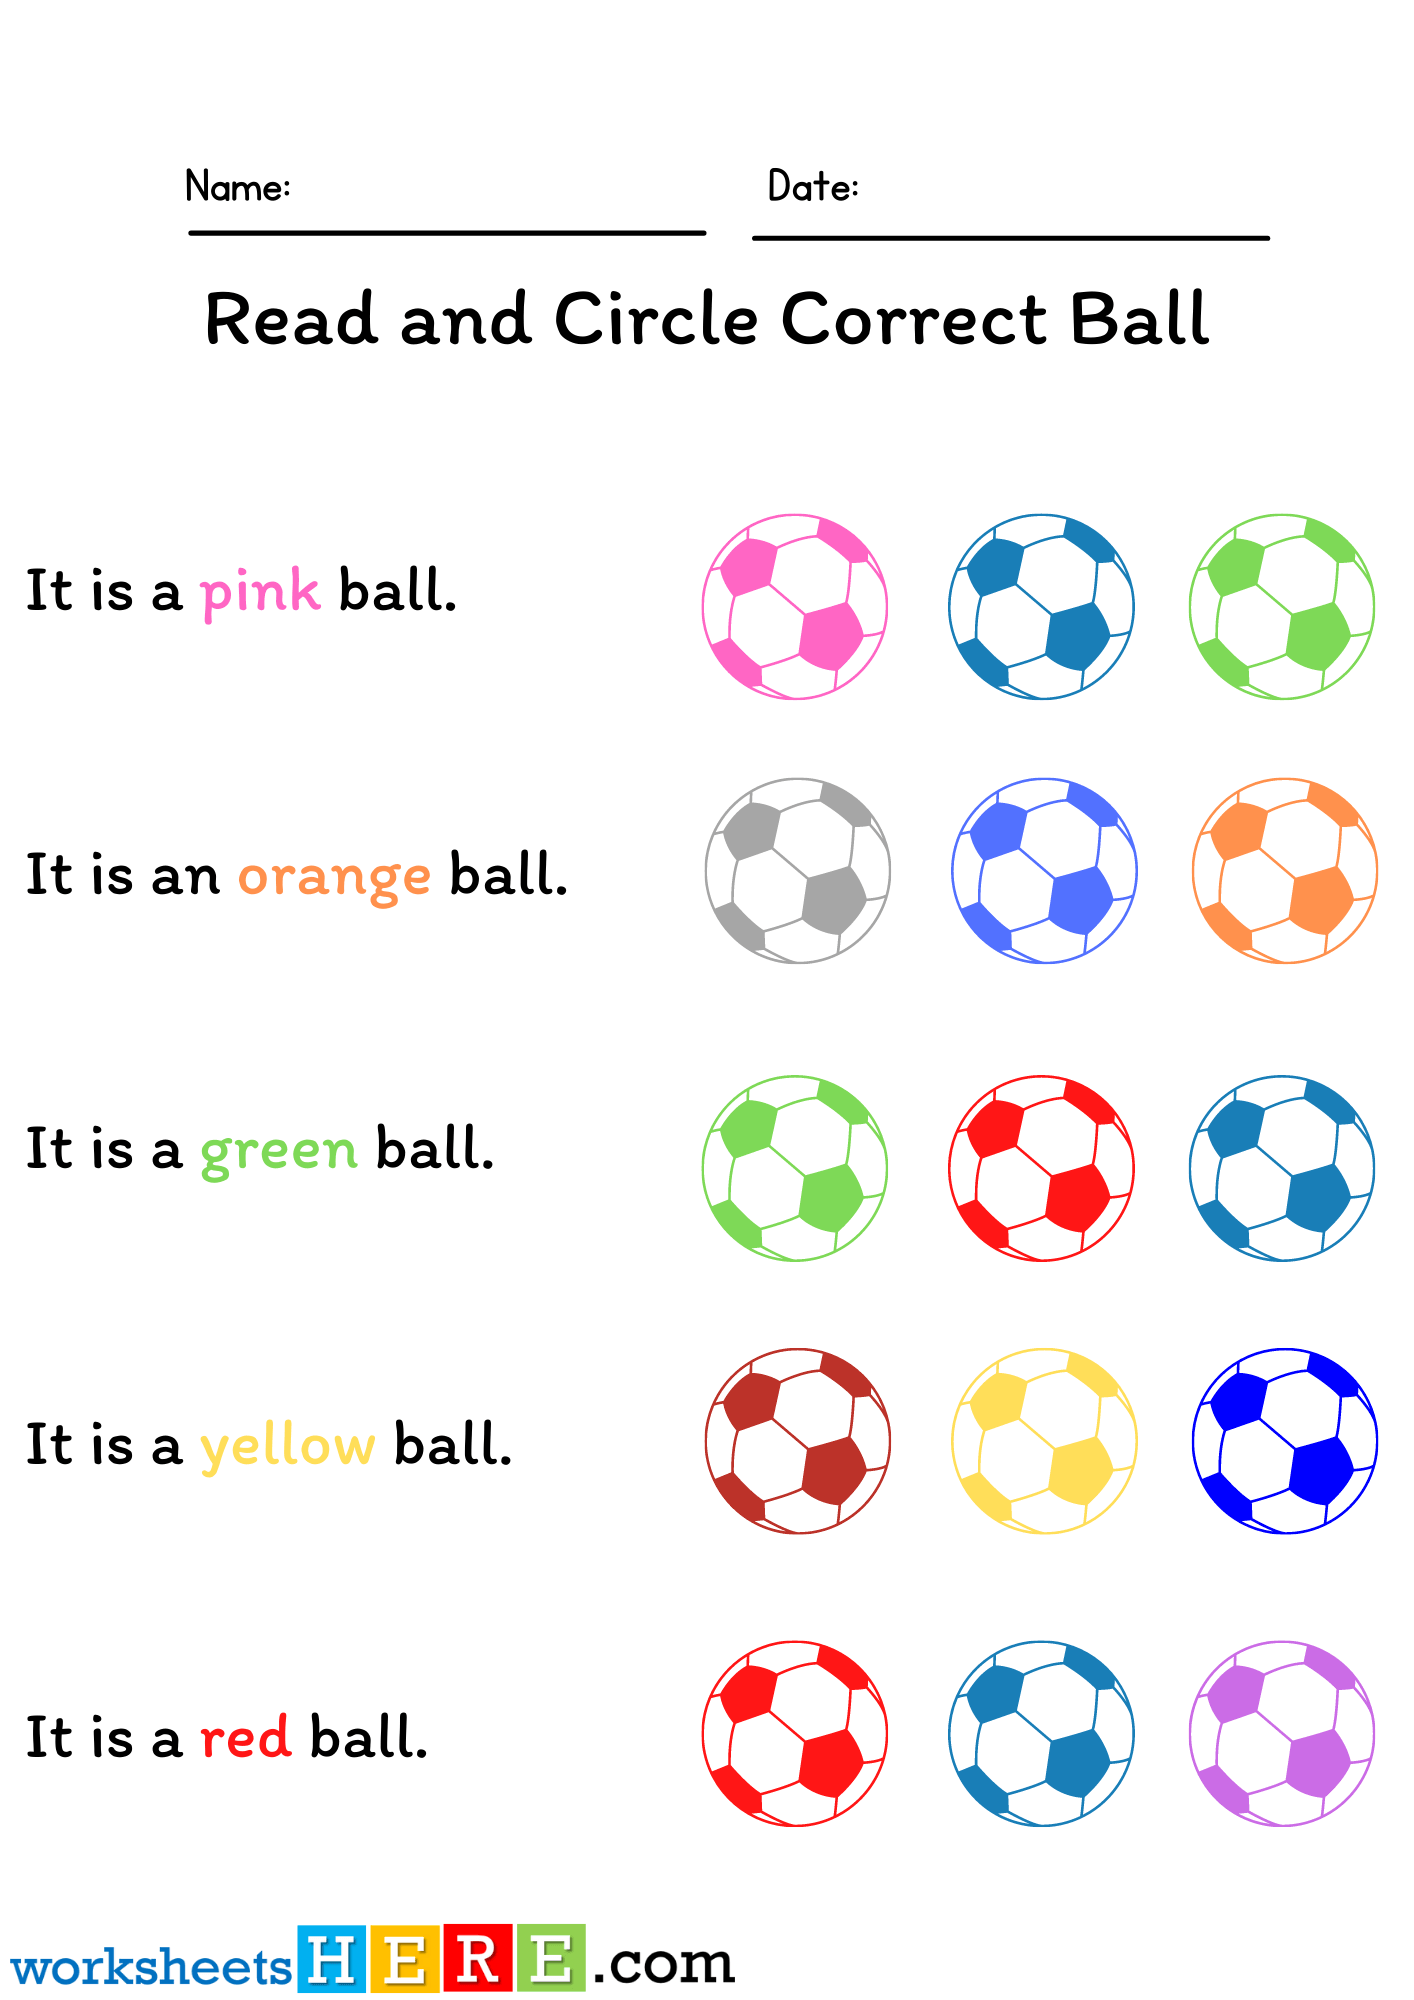 Read and Circle Correct Ball, Colors Activity PDF Worksheet For Kindergarten